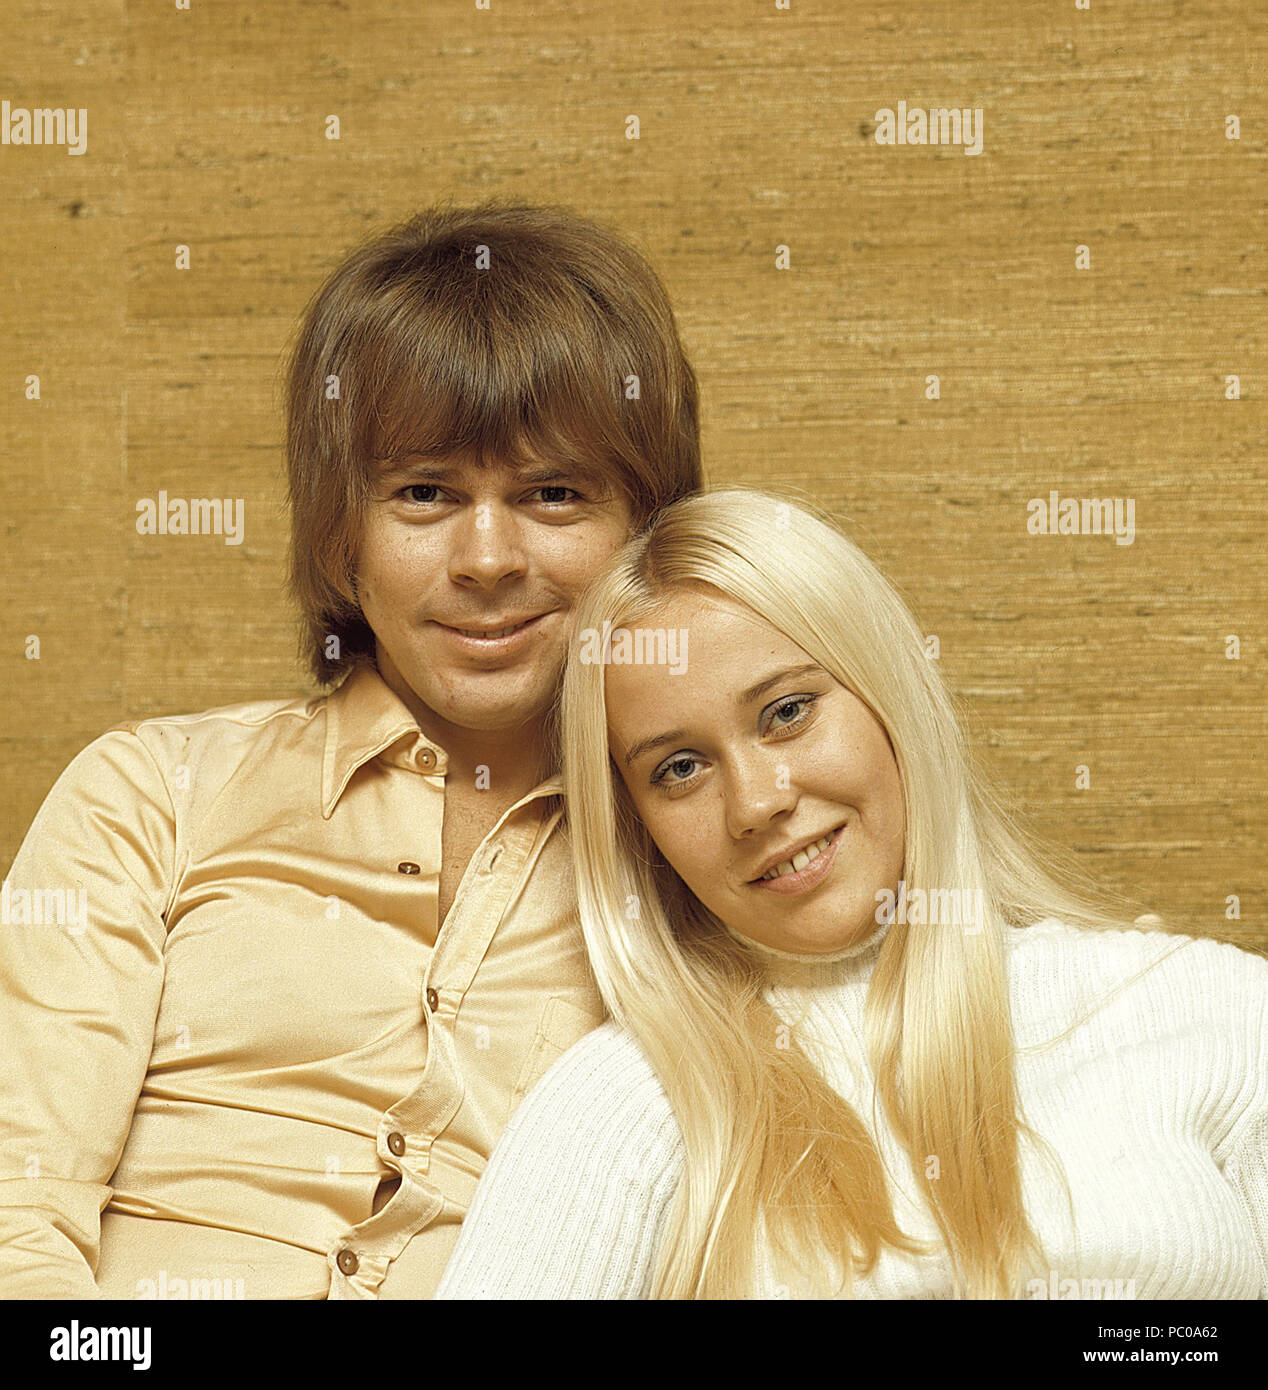 ABBA. Agnetha Fältskog. Singer. Member of the pop group ABBA. Born 1950. Pictured here at home with her fiance Björn Ulvaeus 1970 whom she married on 6 July 1971.  Photo: Kristoffersson Stock Photo